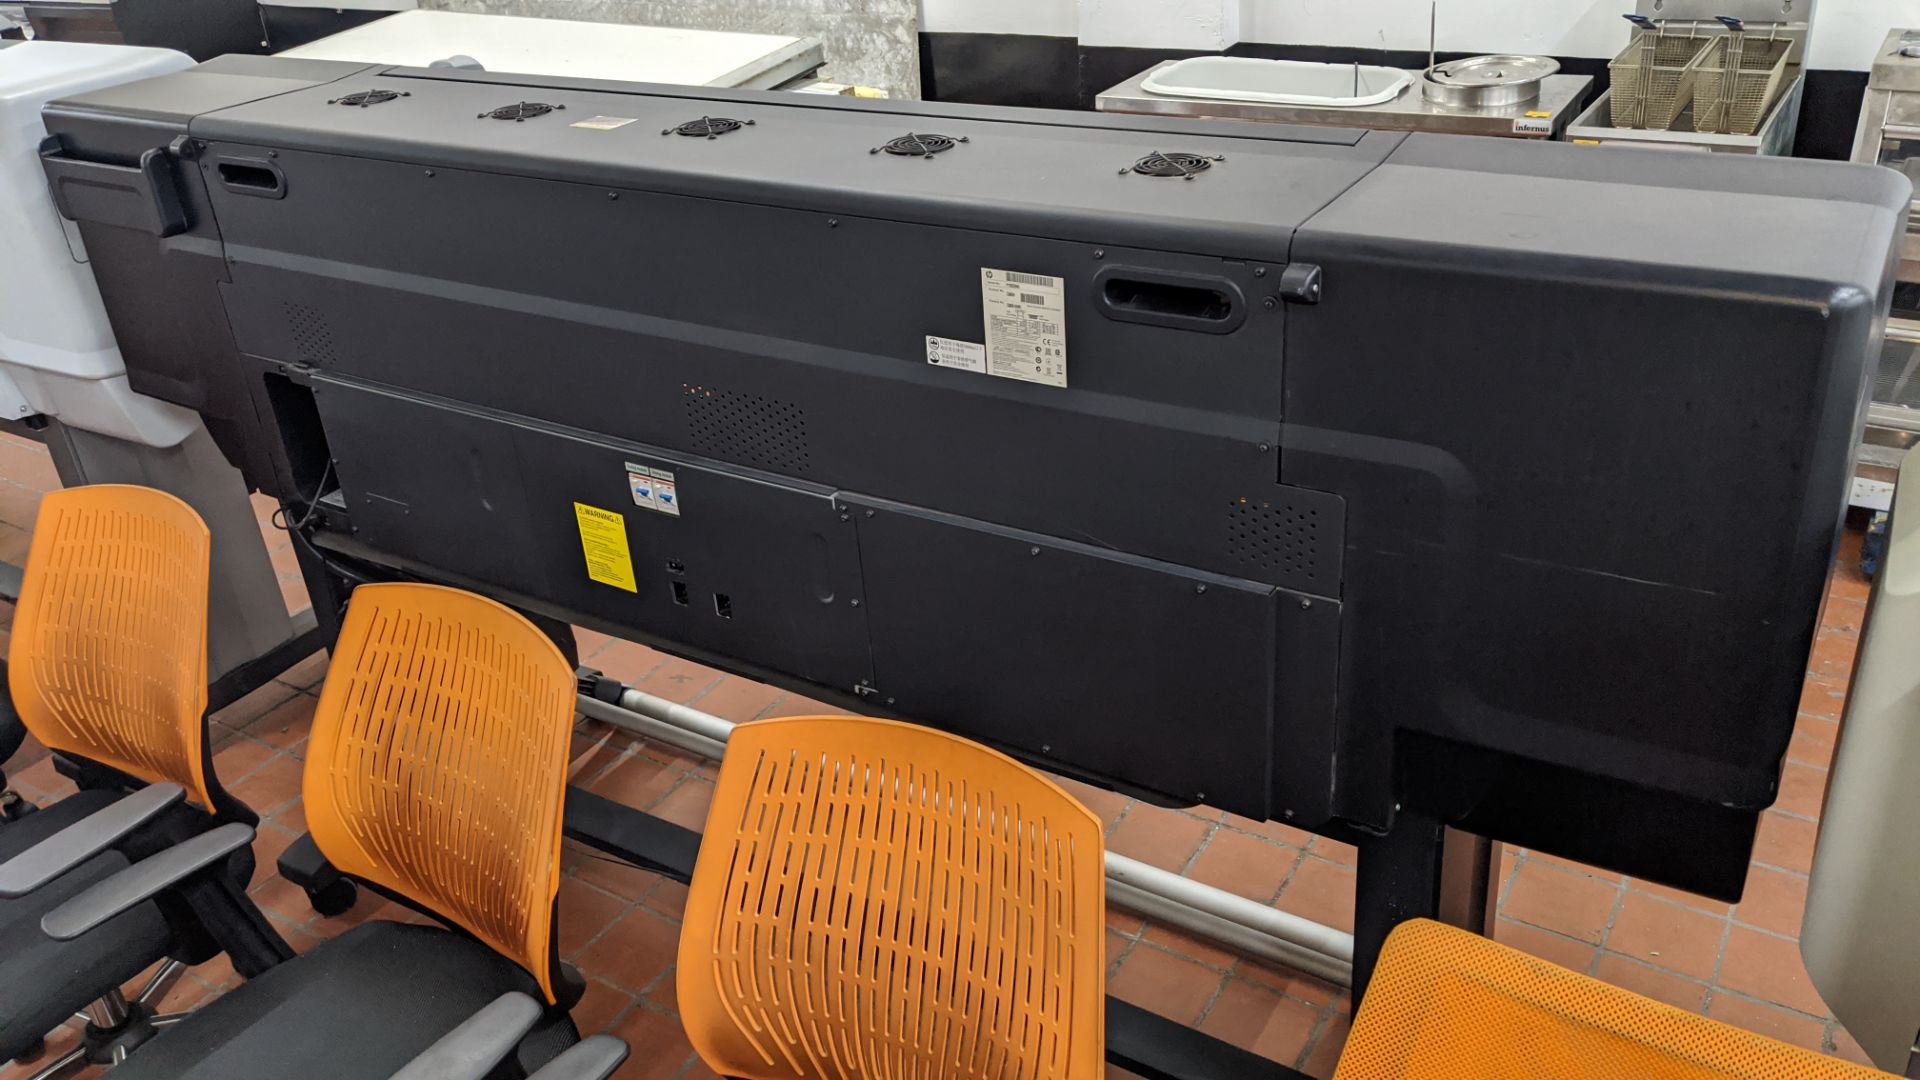 HP latex 260 (HP DesignJet L26500) wide format printer, product number CQ869A (61" capacity). - Image 3 of 9